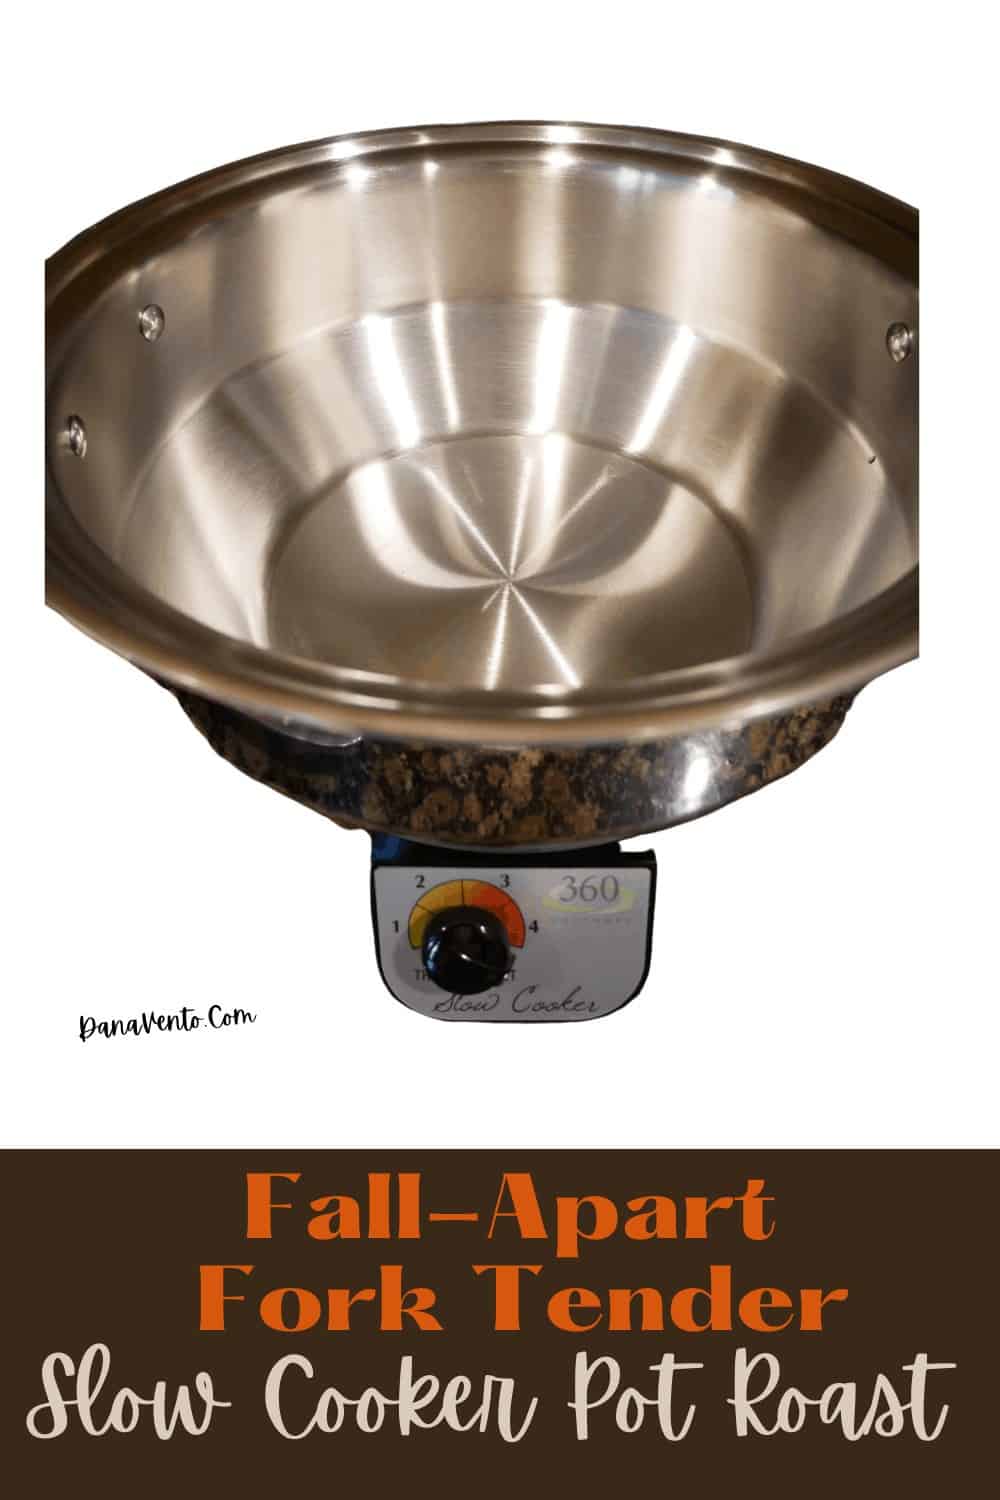 Slow Cooker Base and 6 Qt Stockpot by 360 Cookware on my counter 